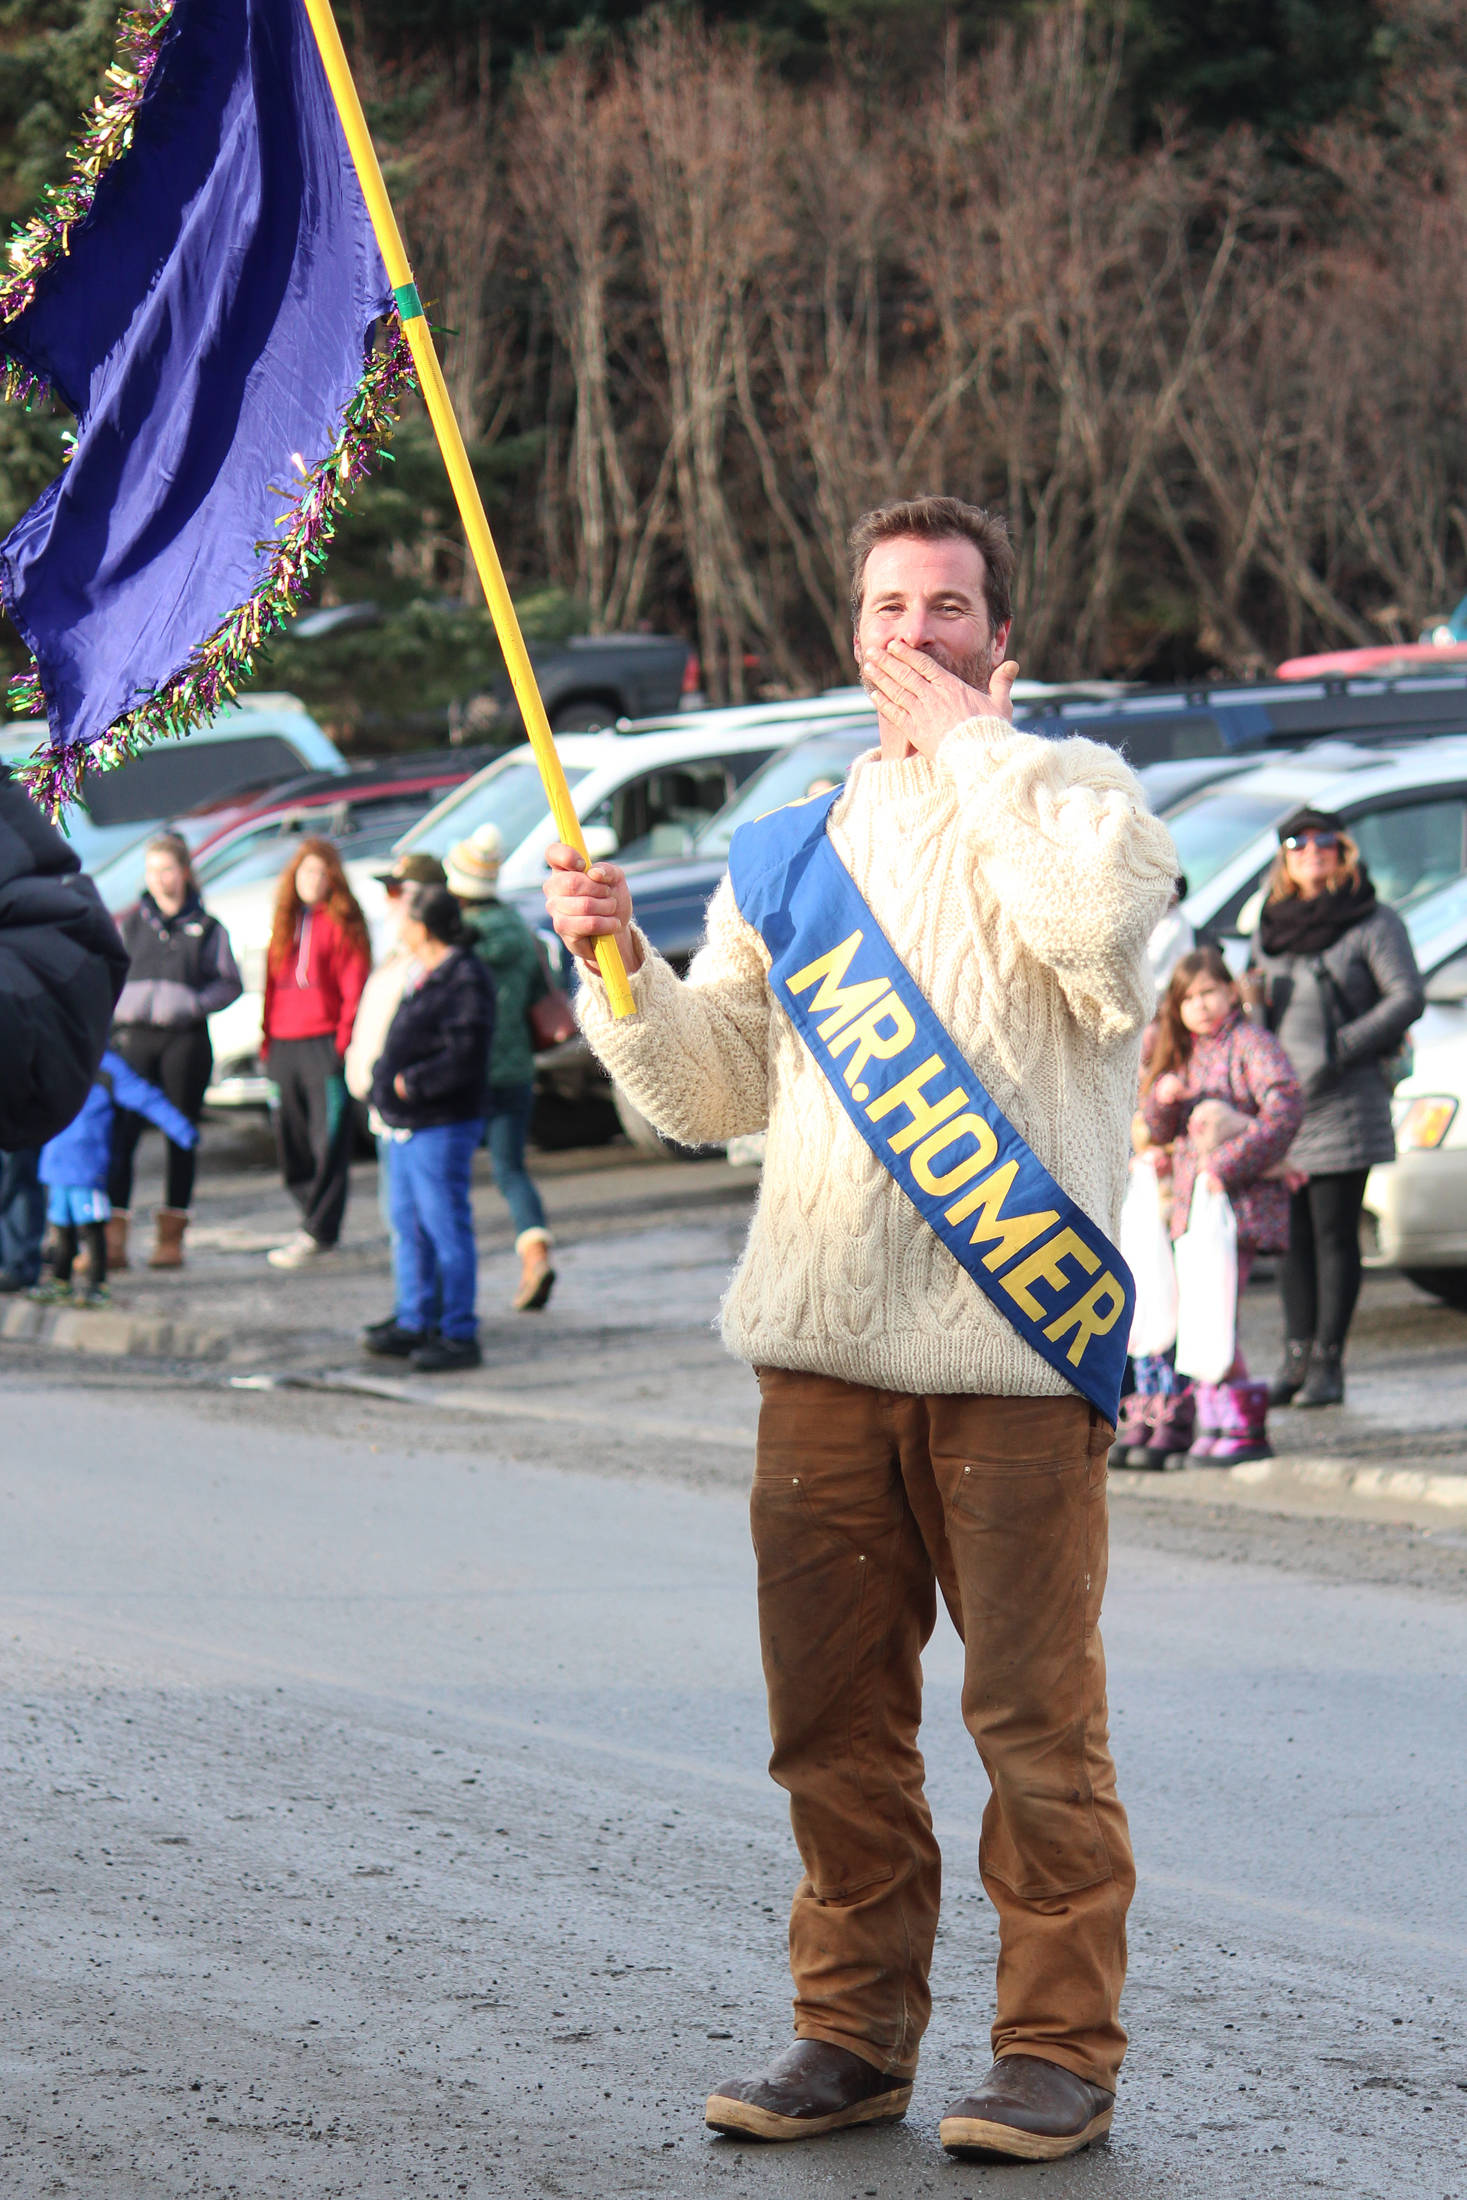 Anthony DiCosola, winner of the 2019 Mr. Homer Pageant, blows a kiss to the crowd Saturday, Feb. 9, 2019 at the Winter Carnival Parade in Homer, Alaska. (Photo by Megan Pacer/Homer News)